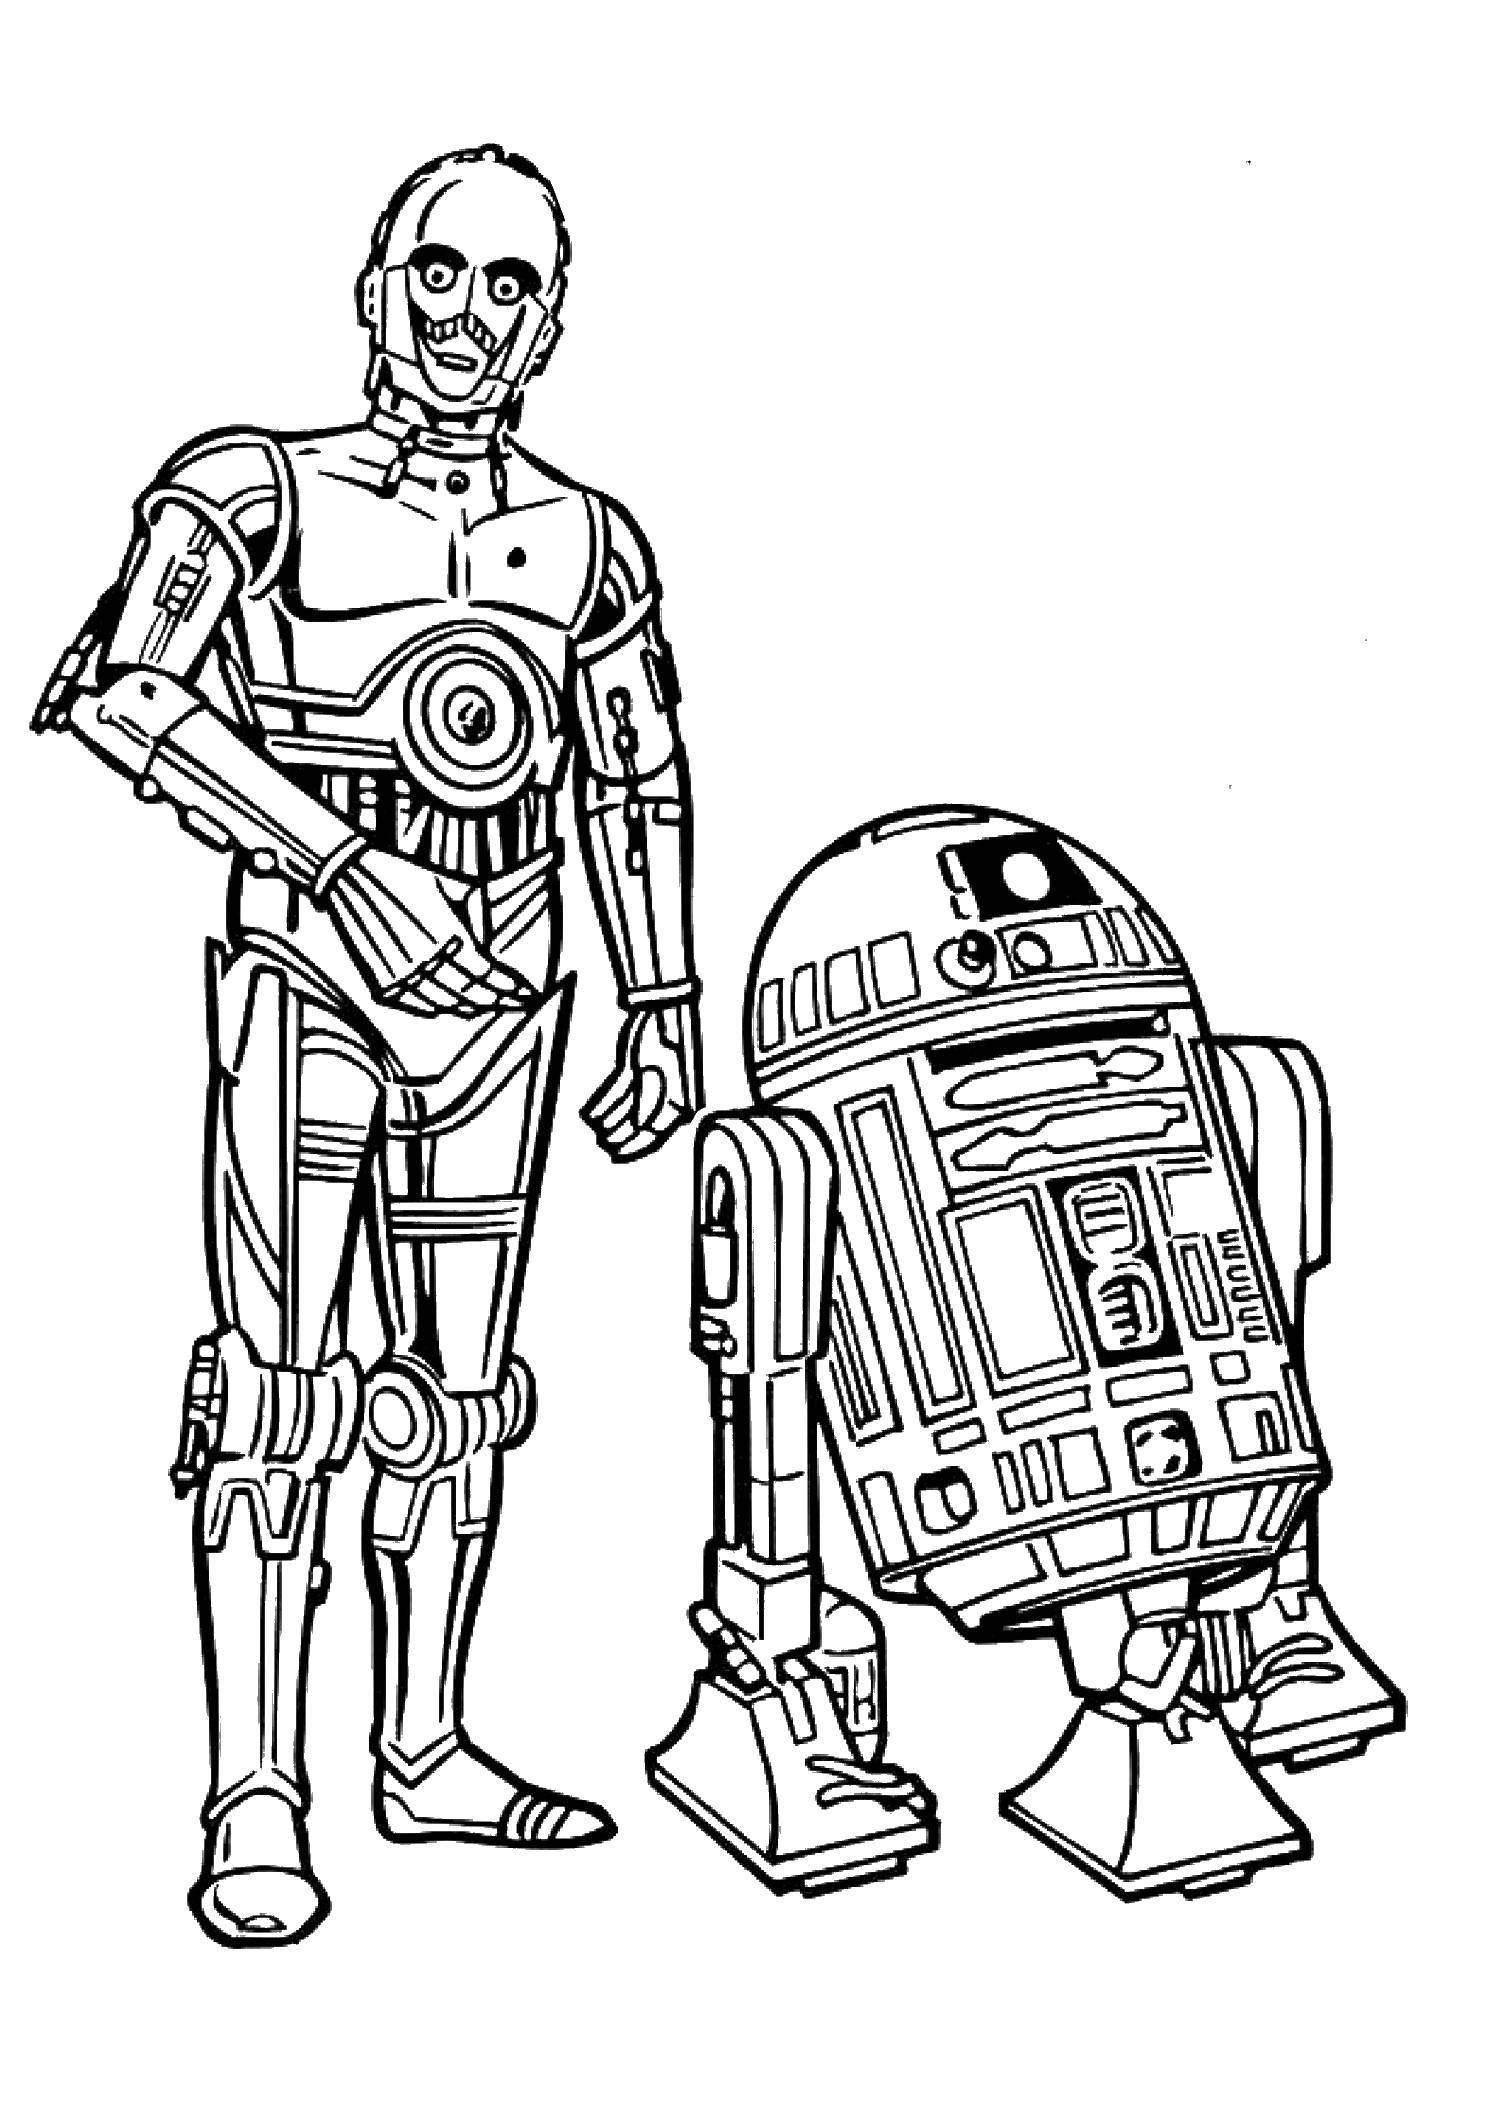 Coloring Droids. Category star wars . Tags:  star wars , droids.